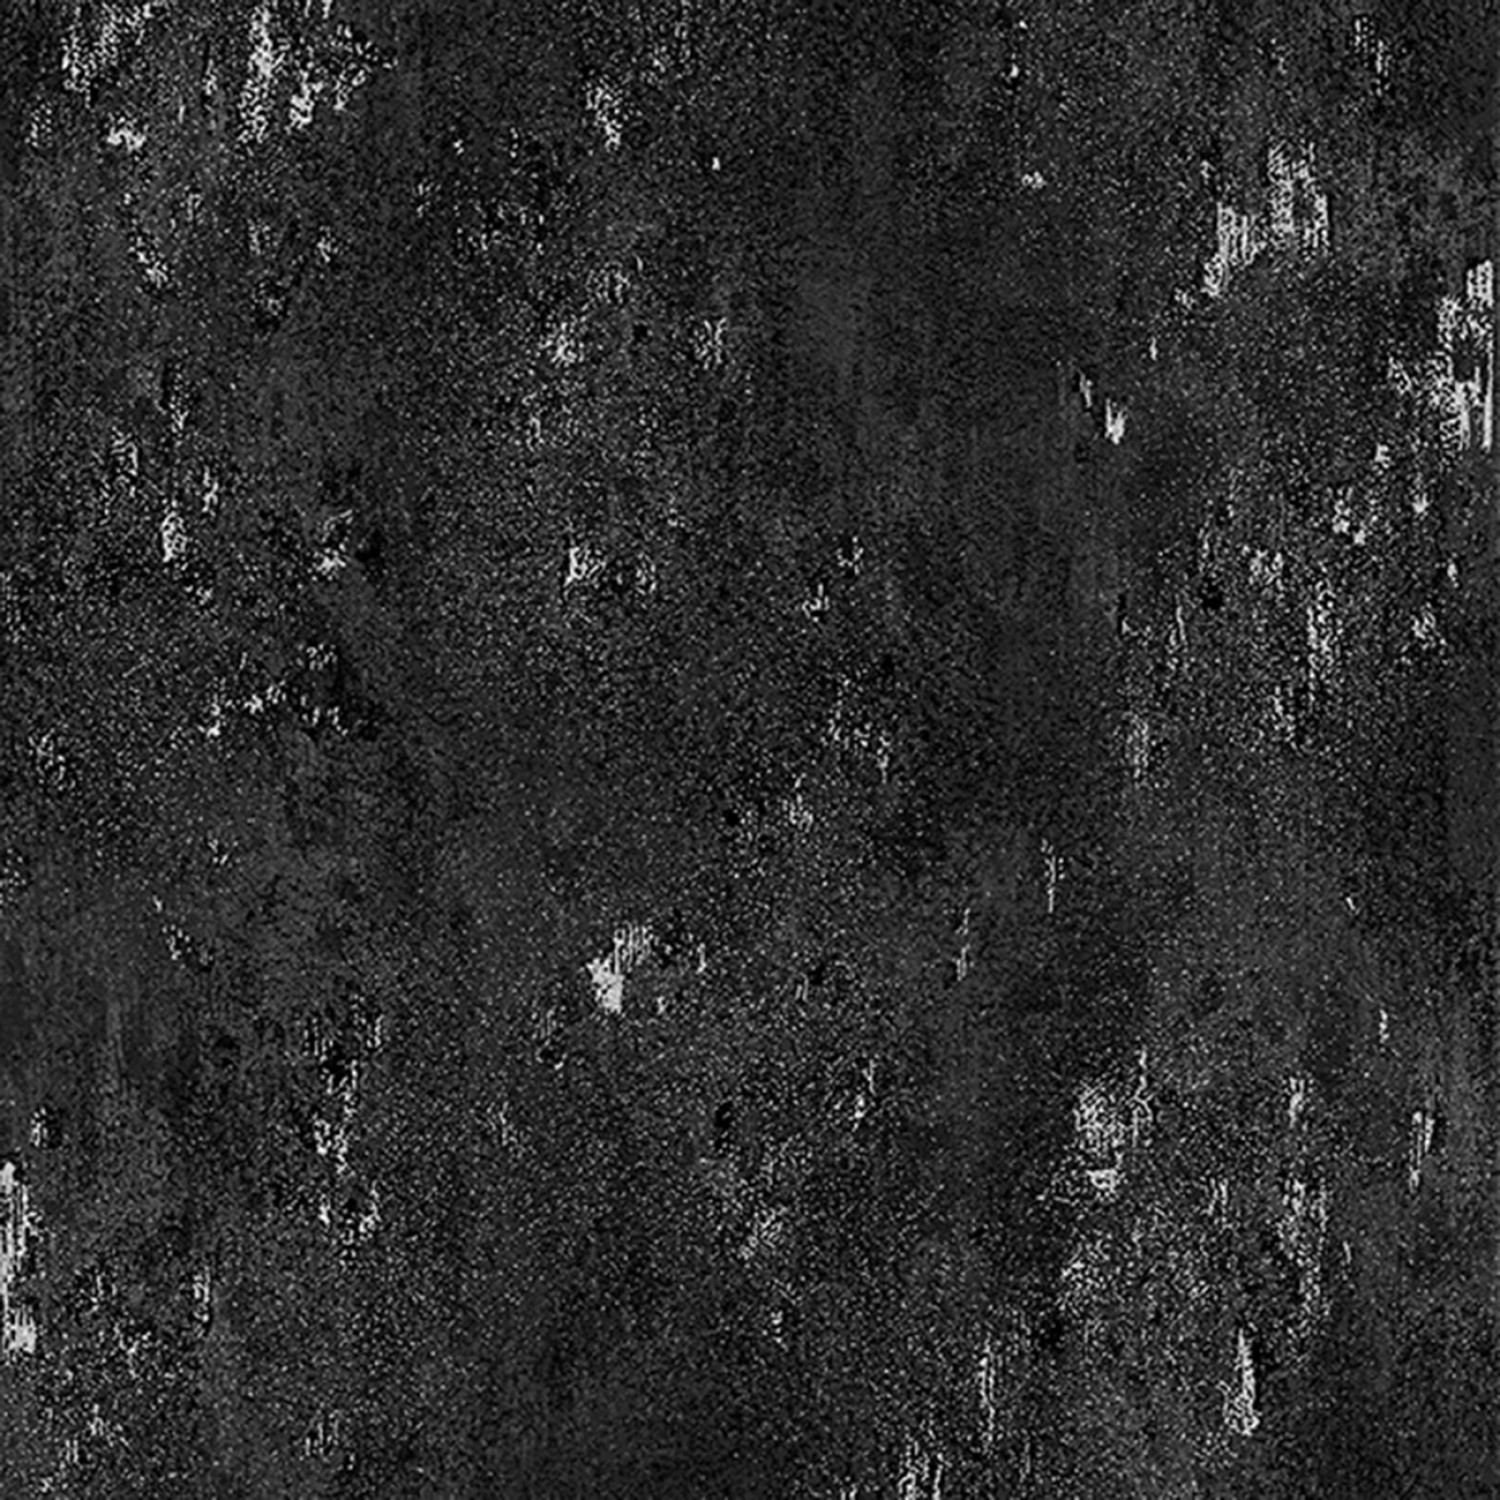 Onyx / Silver Luxe Blender Fabric with Metallic